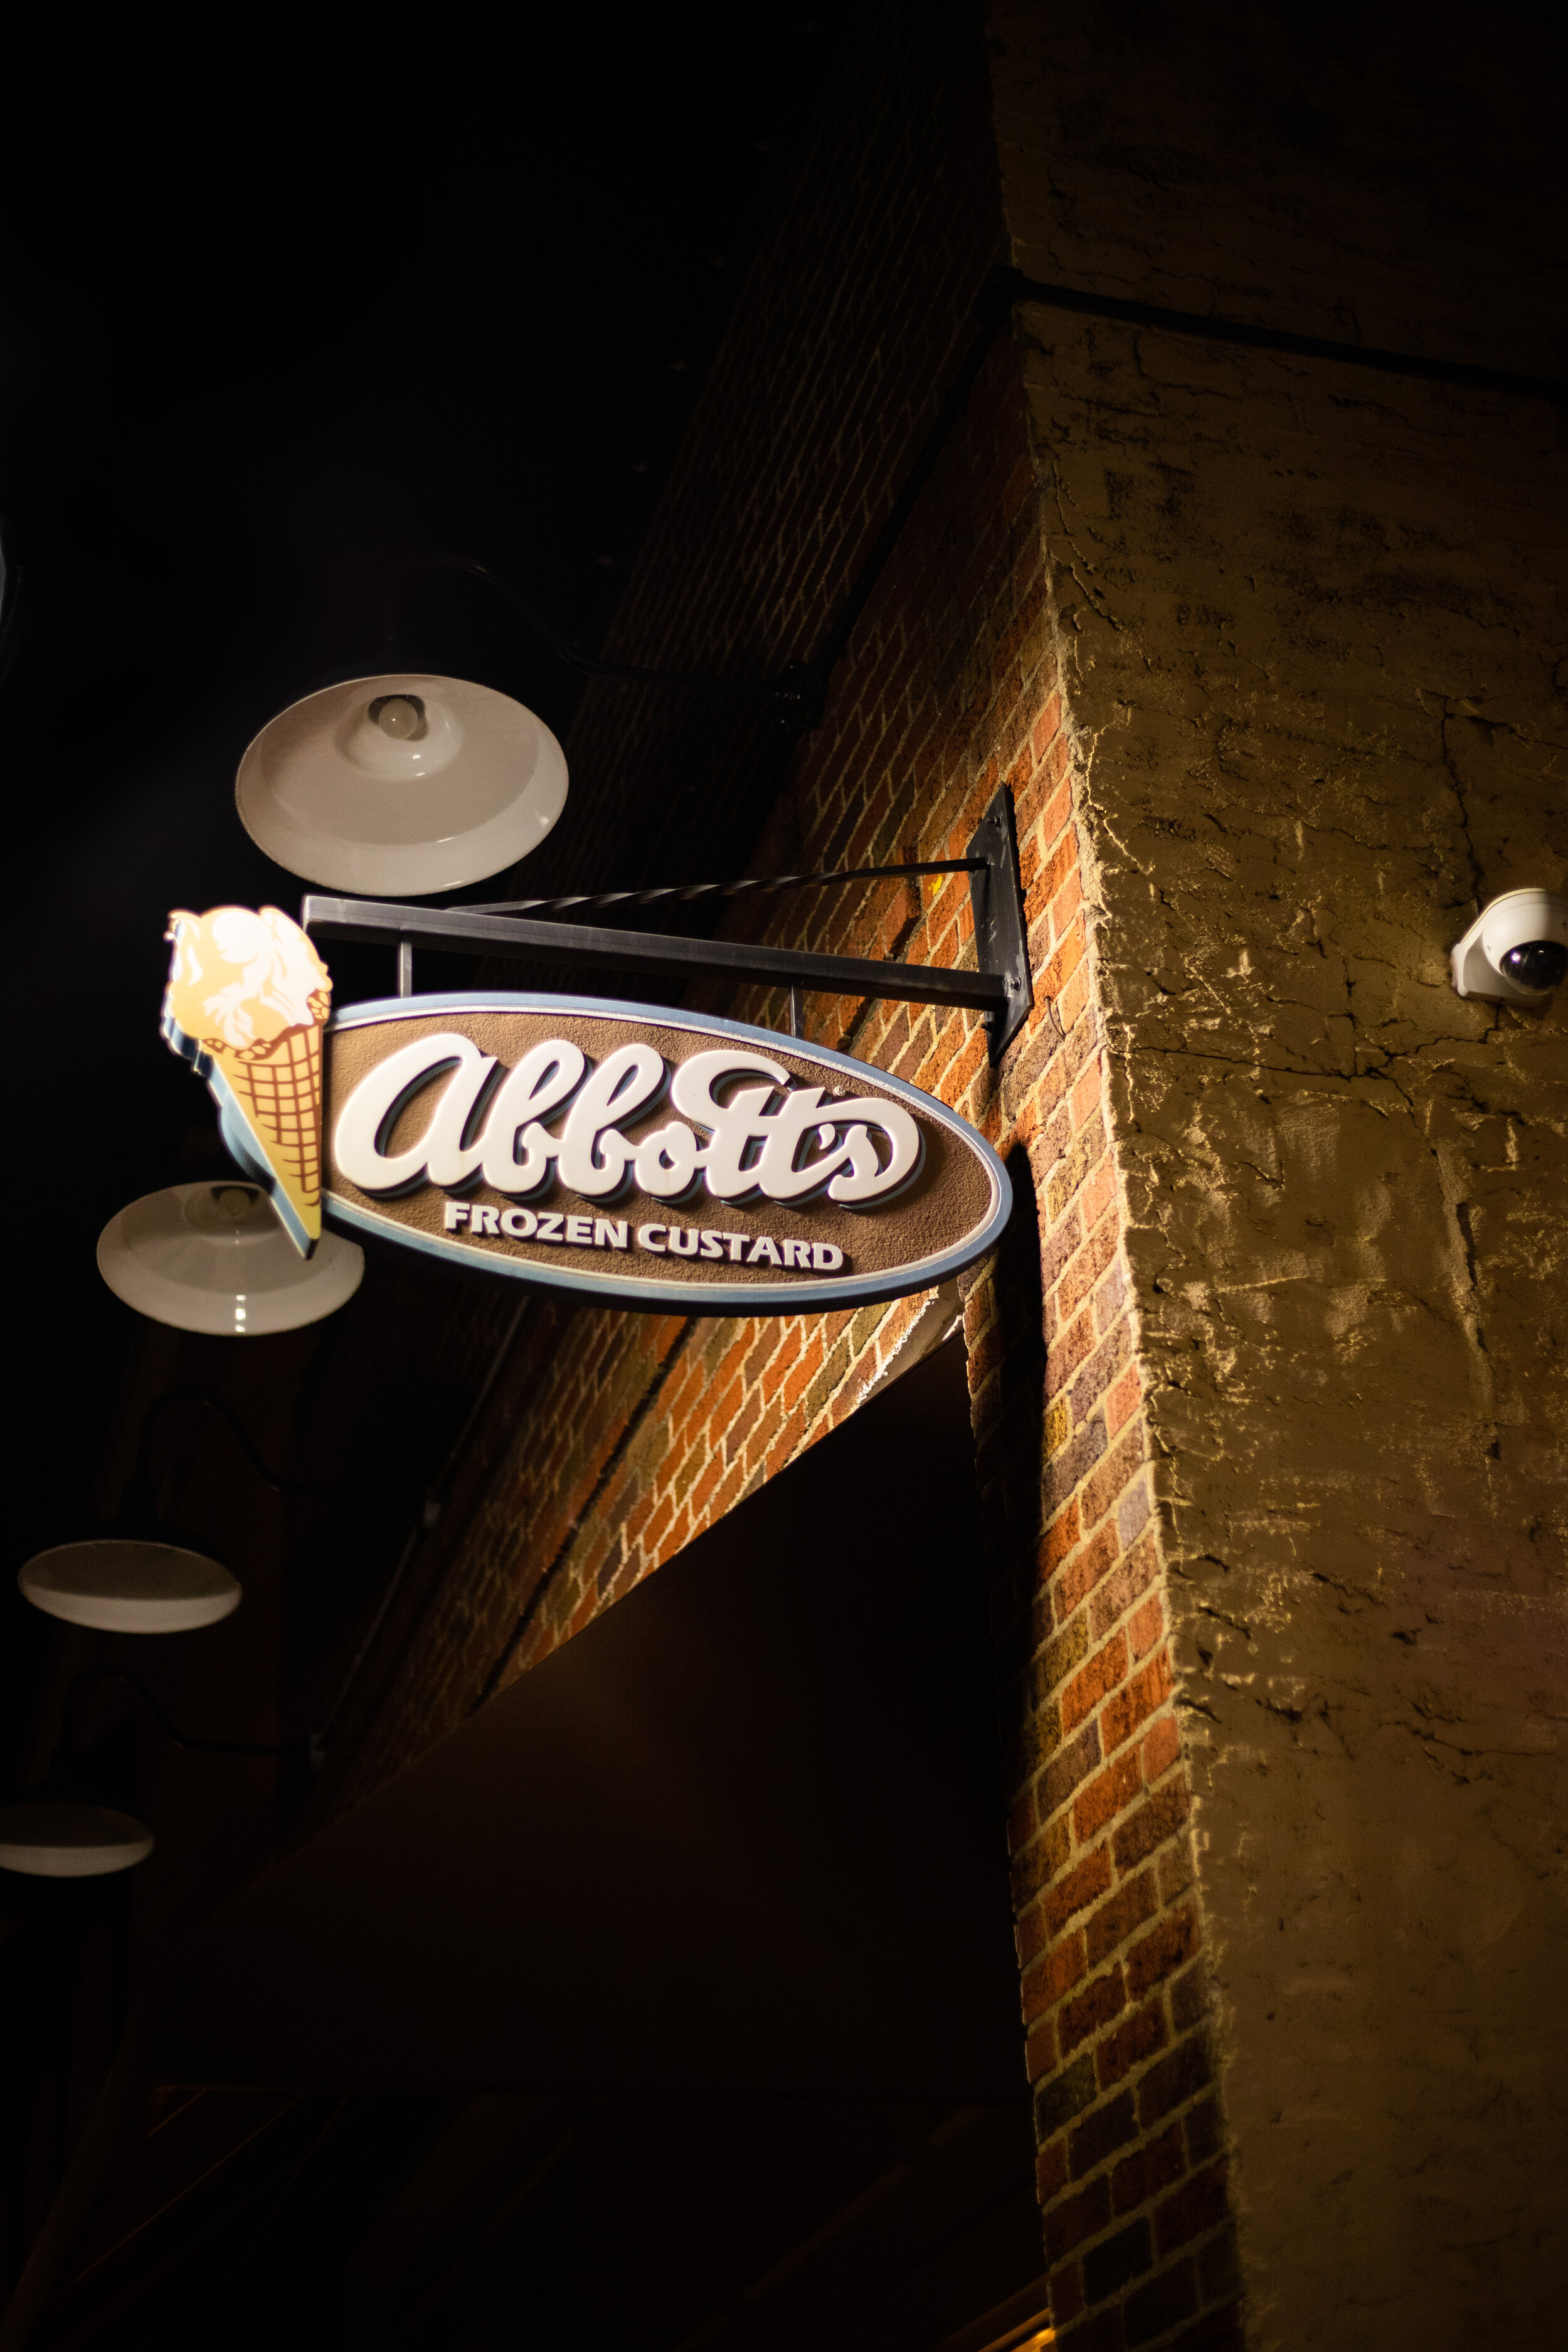 Tucked in the heart of downtown Greer,  Abbotts offers smooth, rich frozen custard that will satisfy any sweet craving.